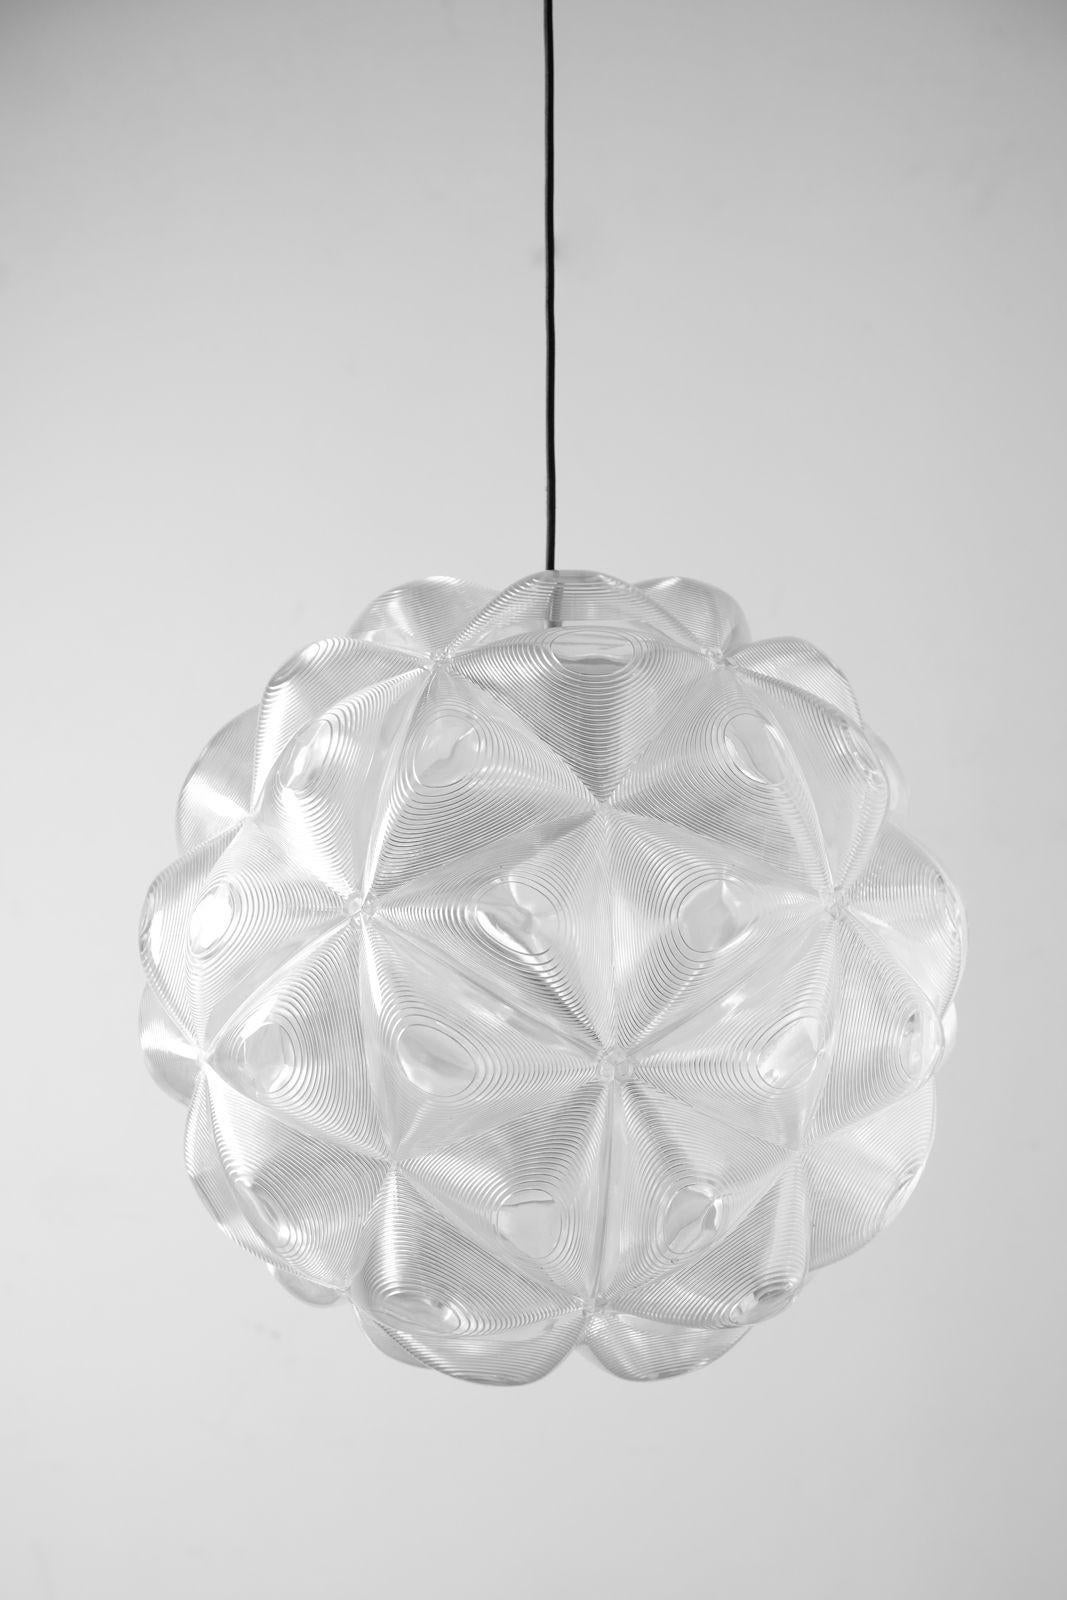 The Lens pendant is an extraordinary contemporary suspension lamp by Tom Dixon. It's made from 60 individual triangular polycarbonate lenses that surround the interior light source. The clear lenses refract and focus the lightbulb at various angles